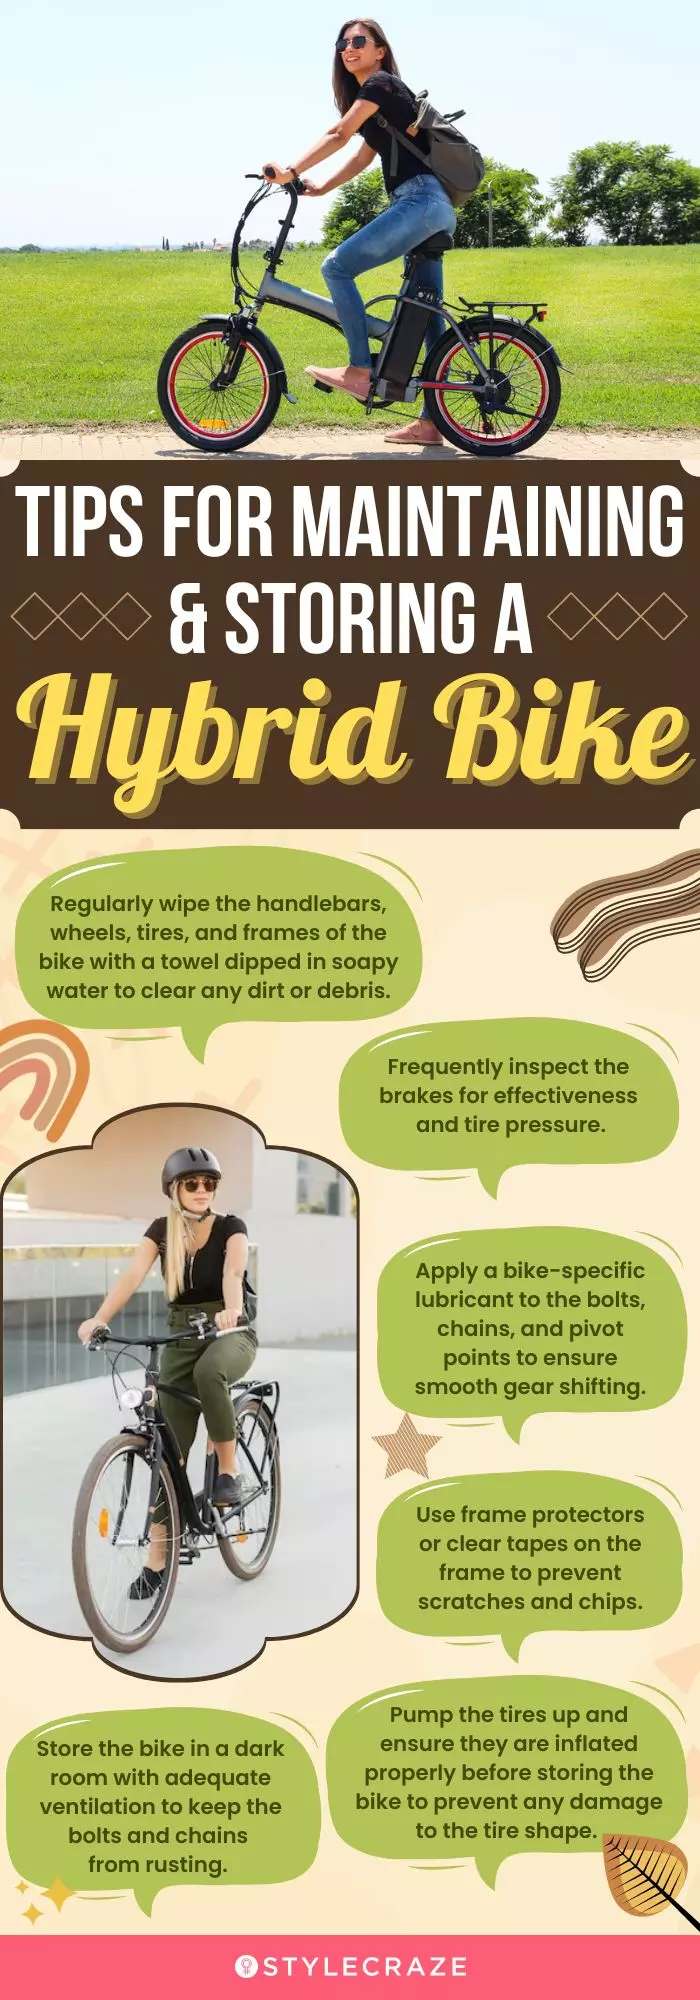 Tips For Maintaining & Storing A Hybrid Bike (infographic)